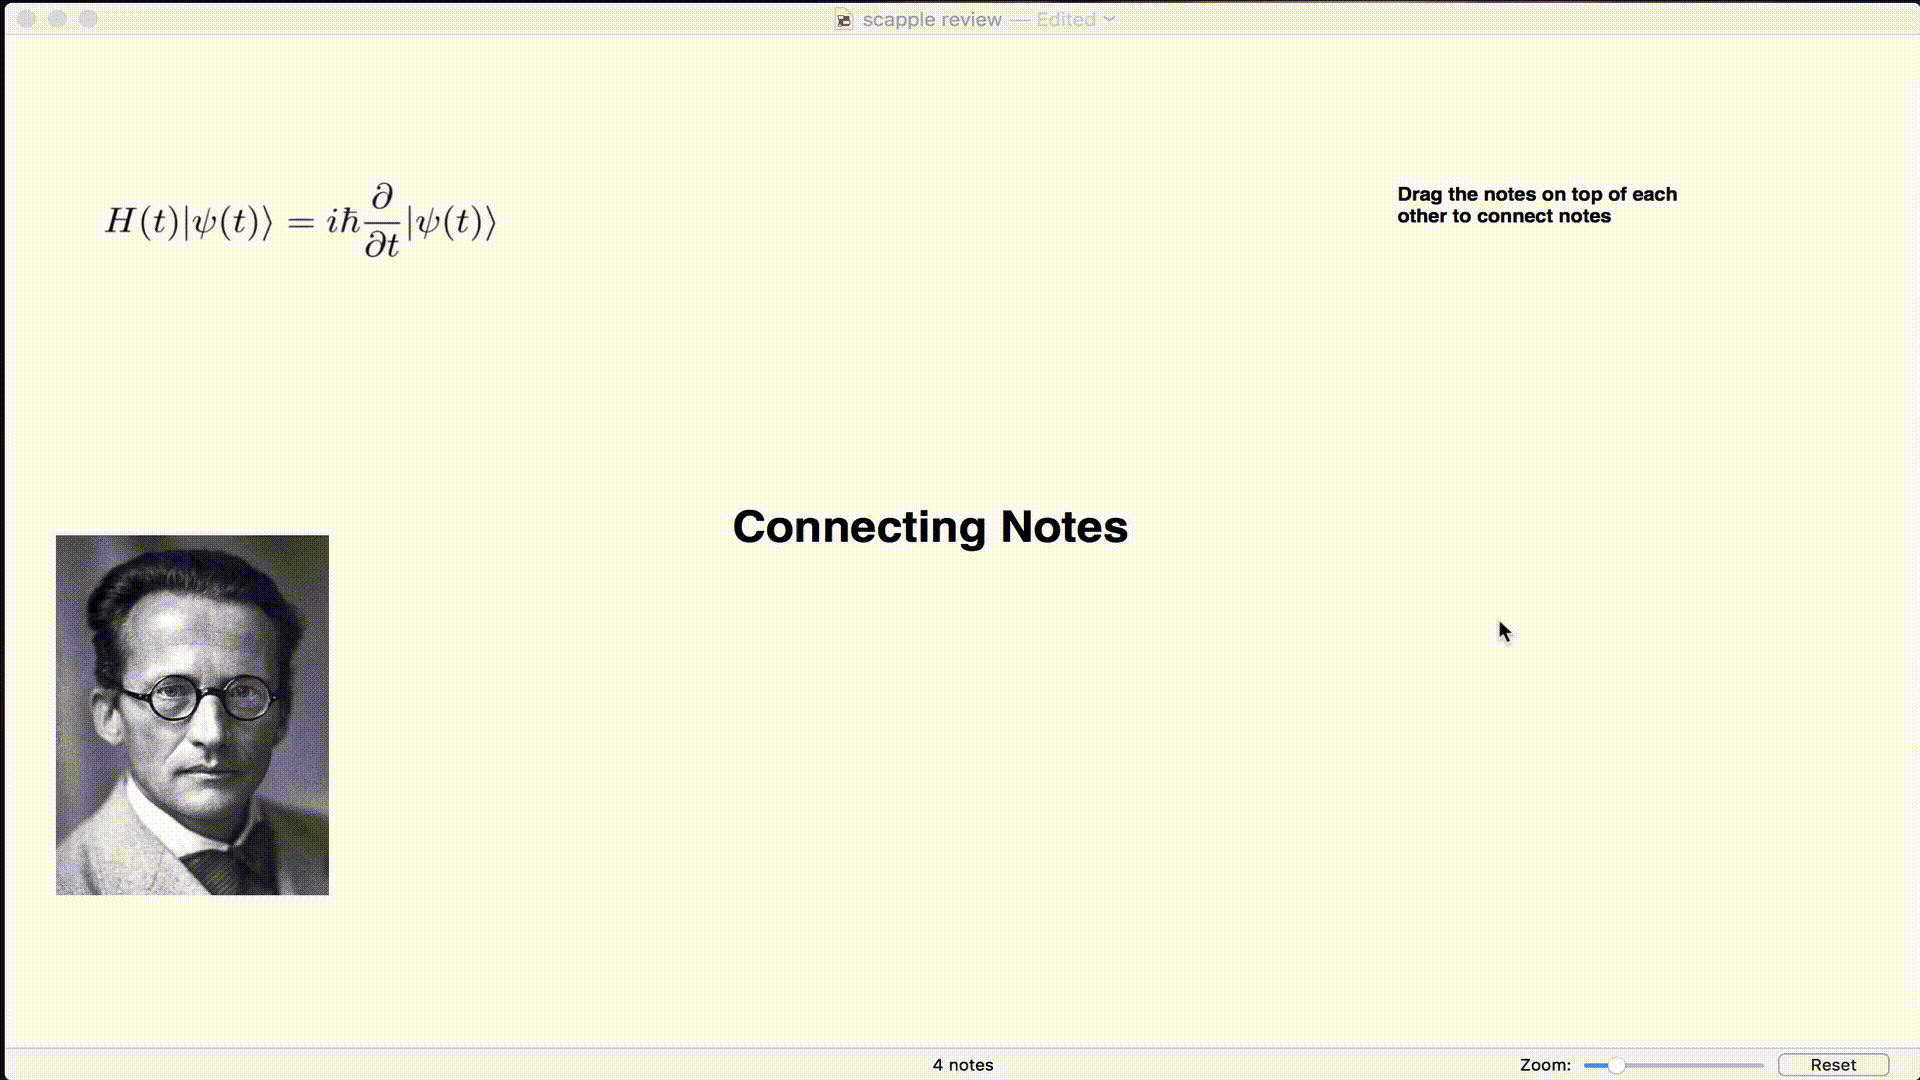 2. Creating Connection Between Notes in Scapple 1